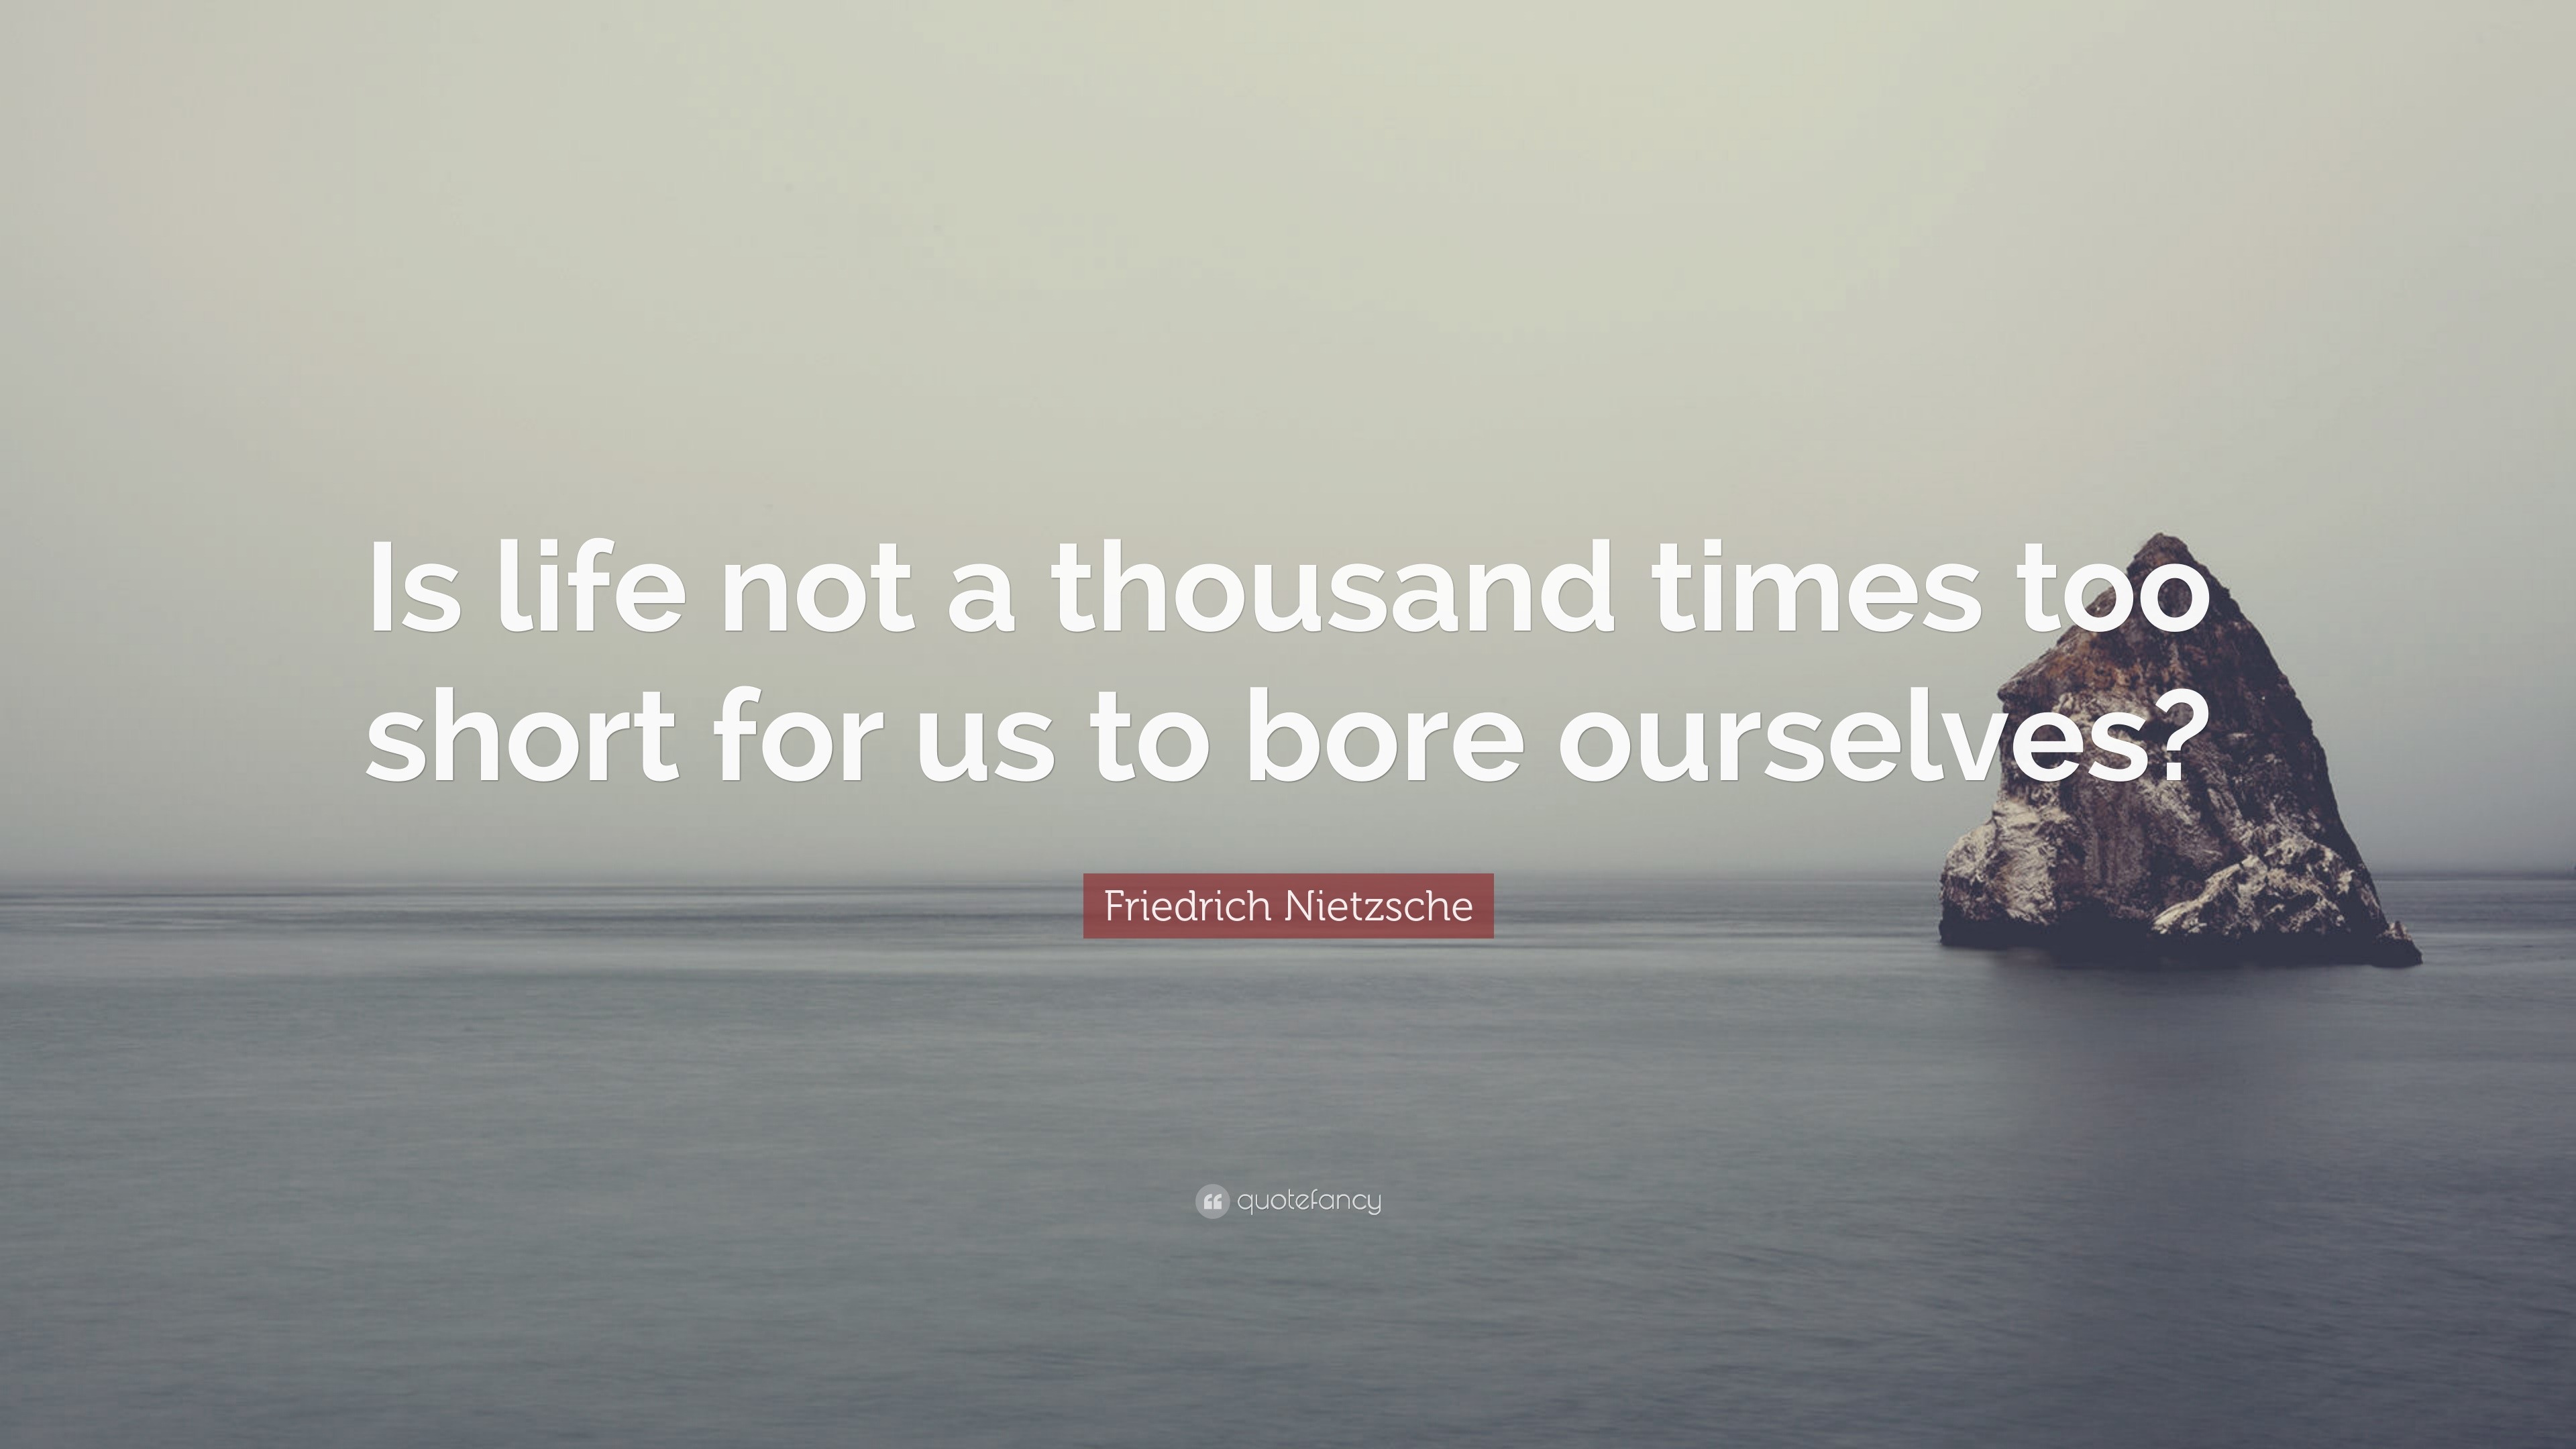 Friedrich Nietzsche Quote - Is life not a thousand times too short for us  to bore ourselves? - Philosophy Art Print for Sale by Styrman